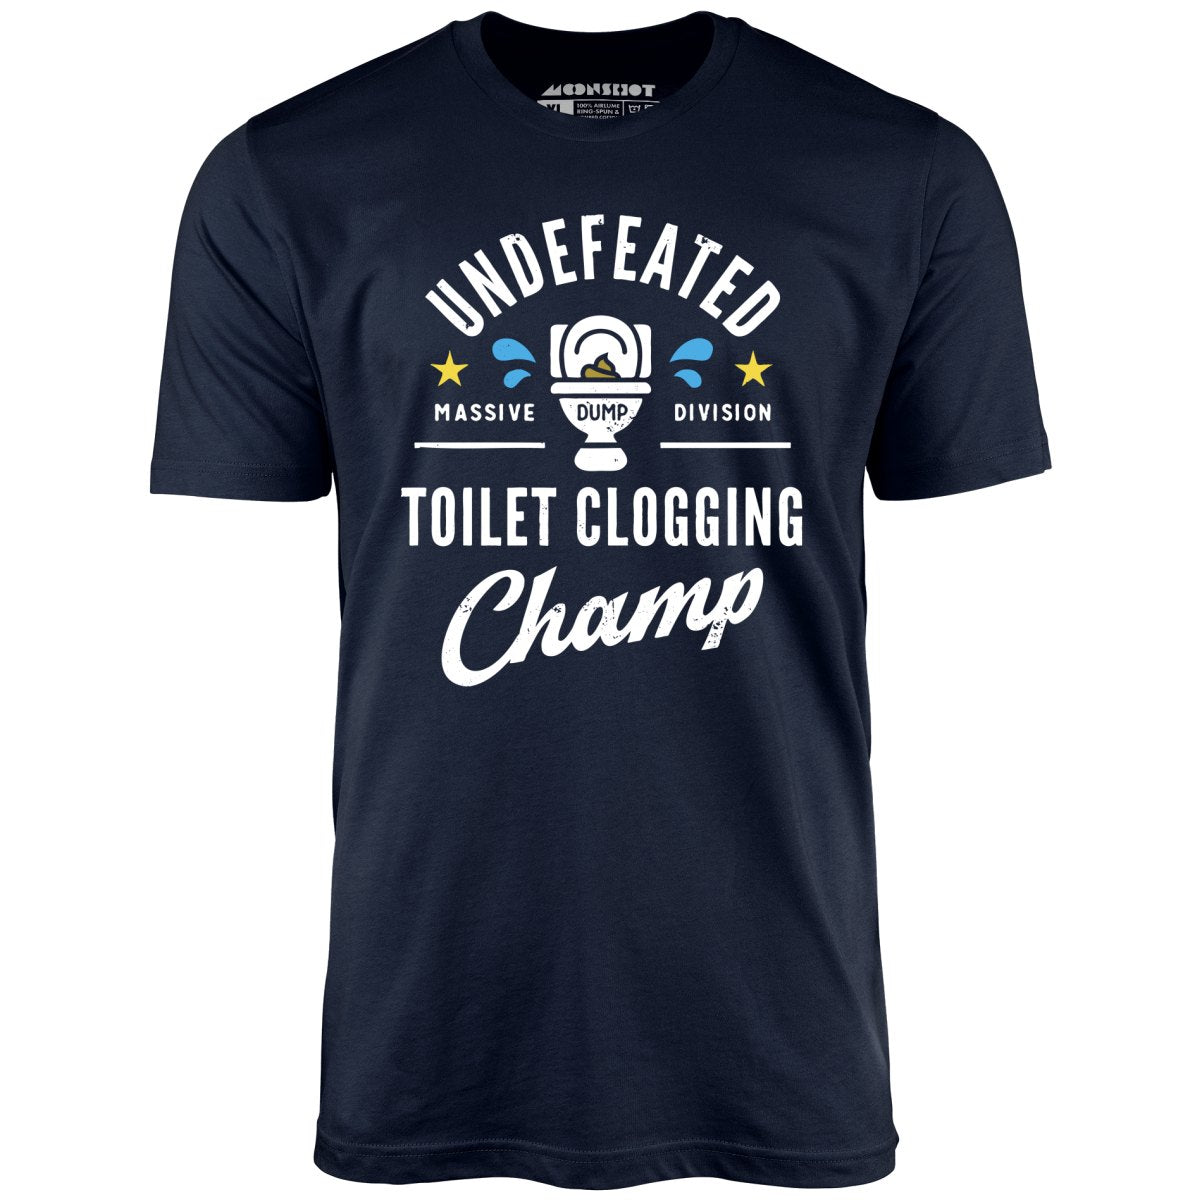 Undefeated Toilet Clogging Champ - Unisex T-Shirt